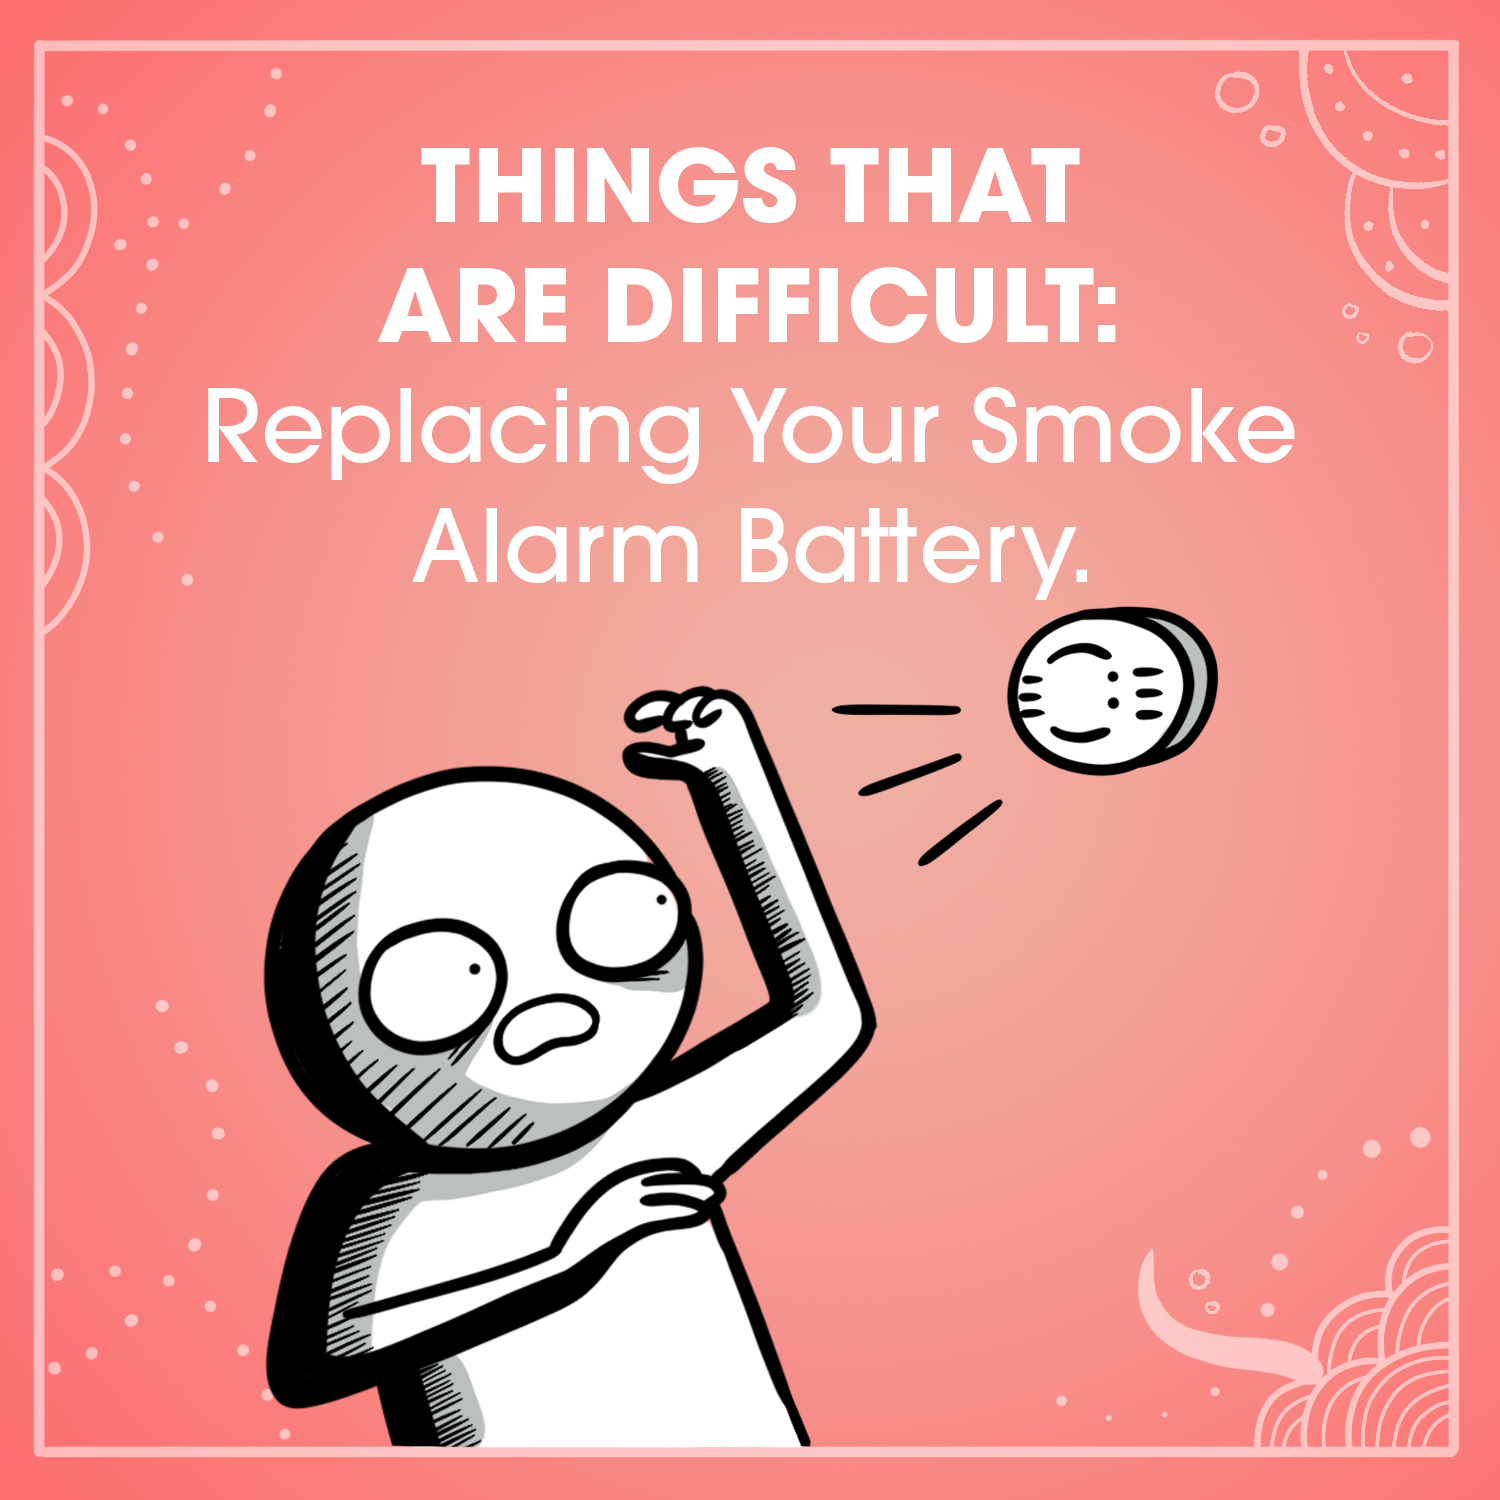 Things That are Difficult: Replacing Your Smoke Alarm Battery